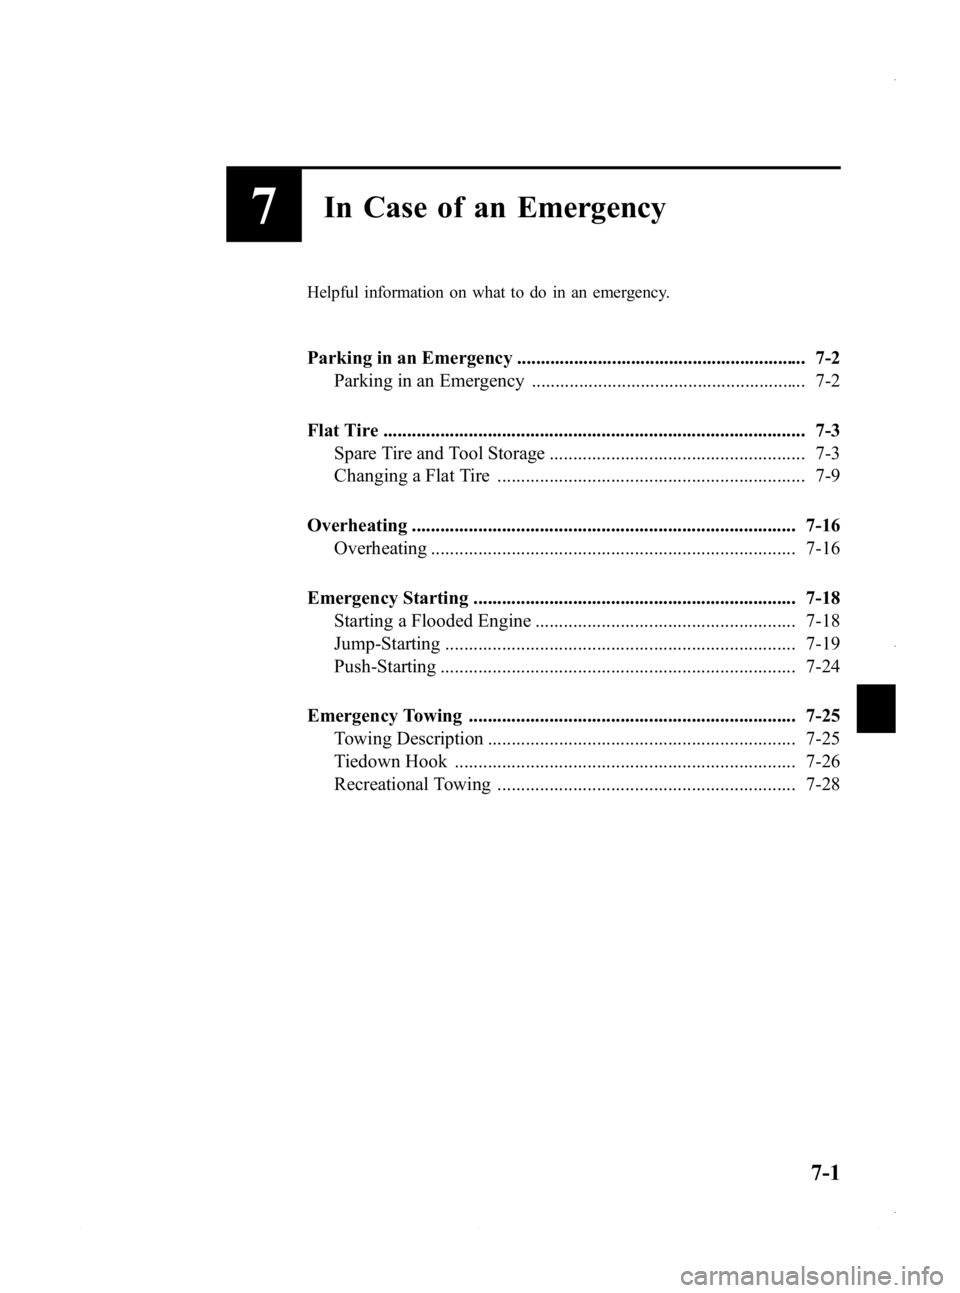 MAZDA MODEL 3 4-DOOR 2013  Owners Manual Black plate (437,1)
7In Case of an Emergency
Helpful information on what to do in an emergency.
Parking in an Emergency ............................................................. 7-2Parking in an E